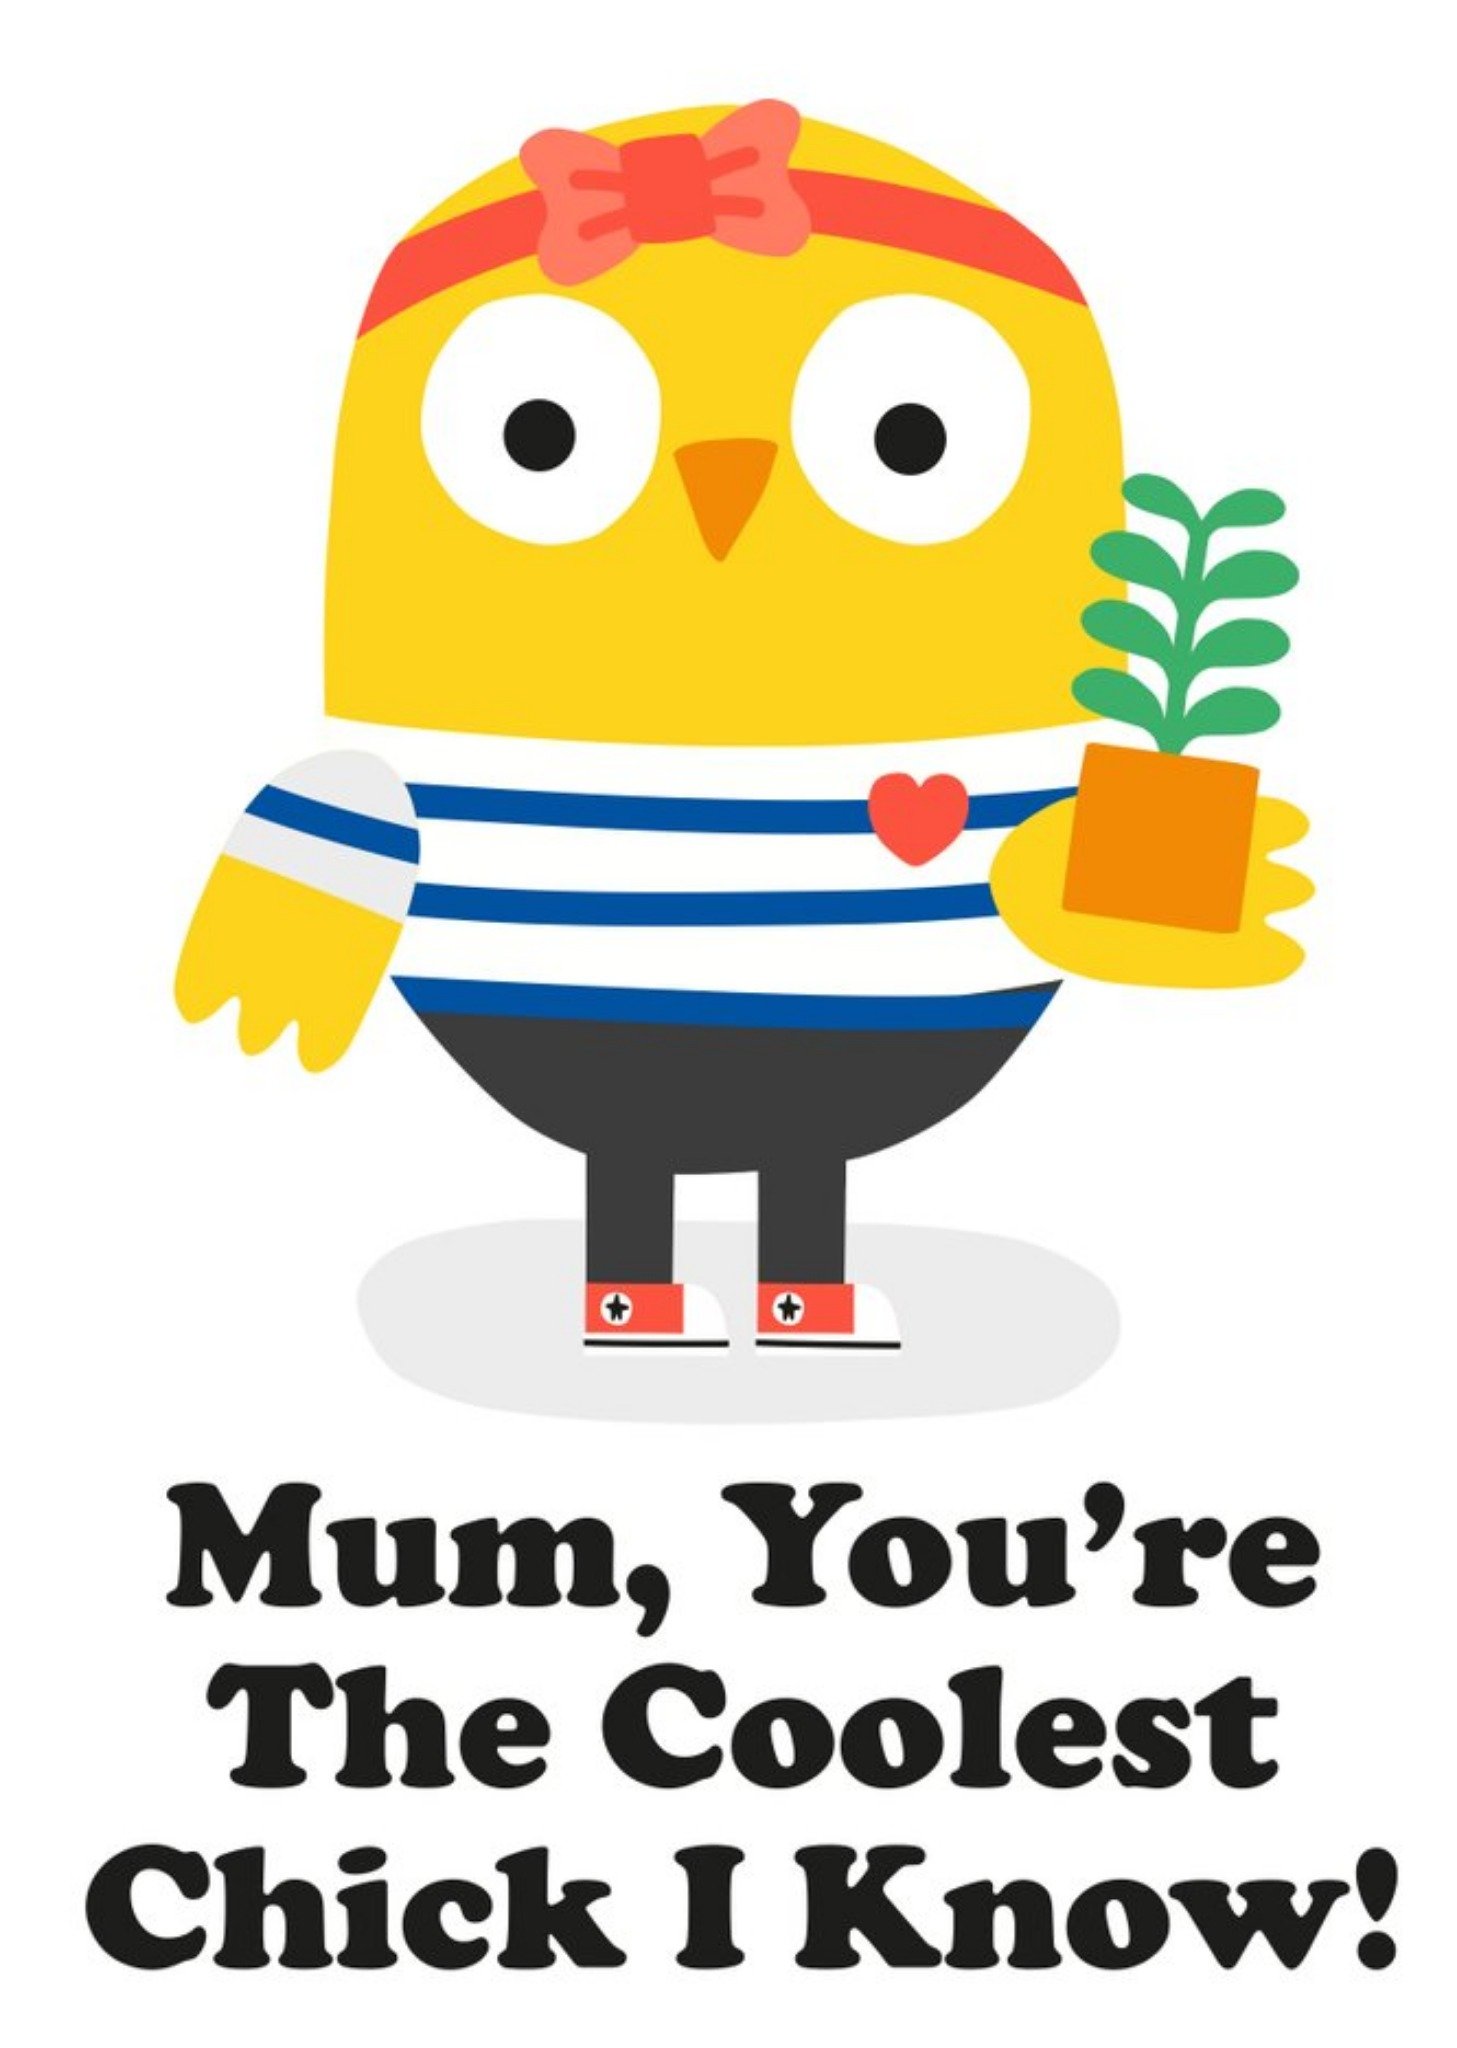 Moonpig Illustration Of A Cute Chick You're The Coolest Chick I Know Funny Pun Card Ecard